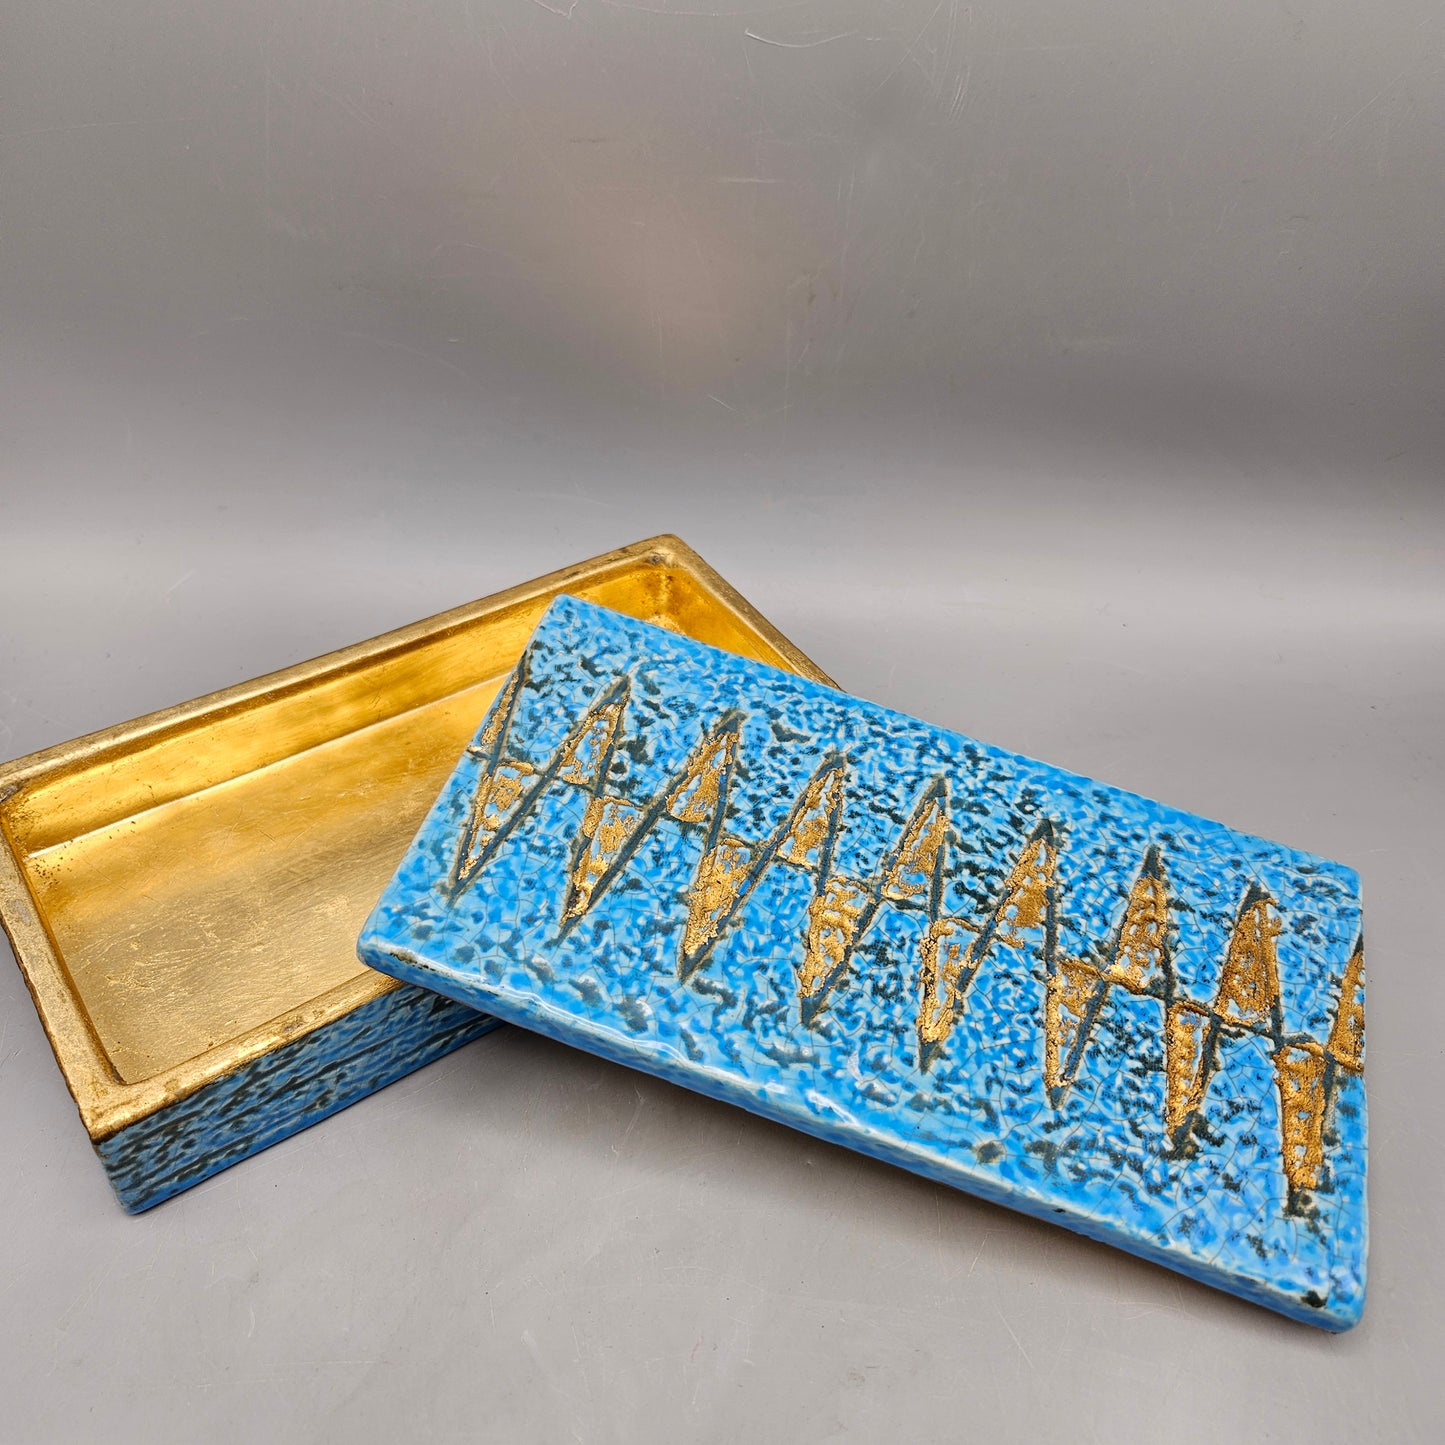 Corcovado Turquoise Rectangular Box by Tozai